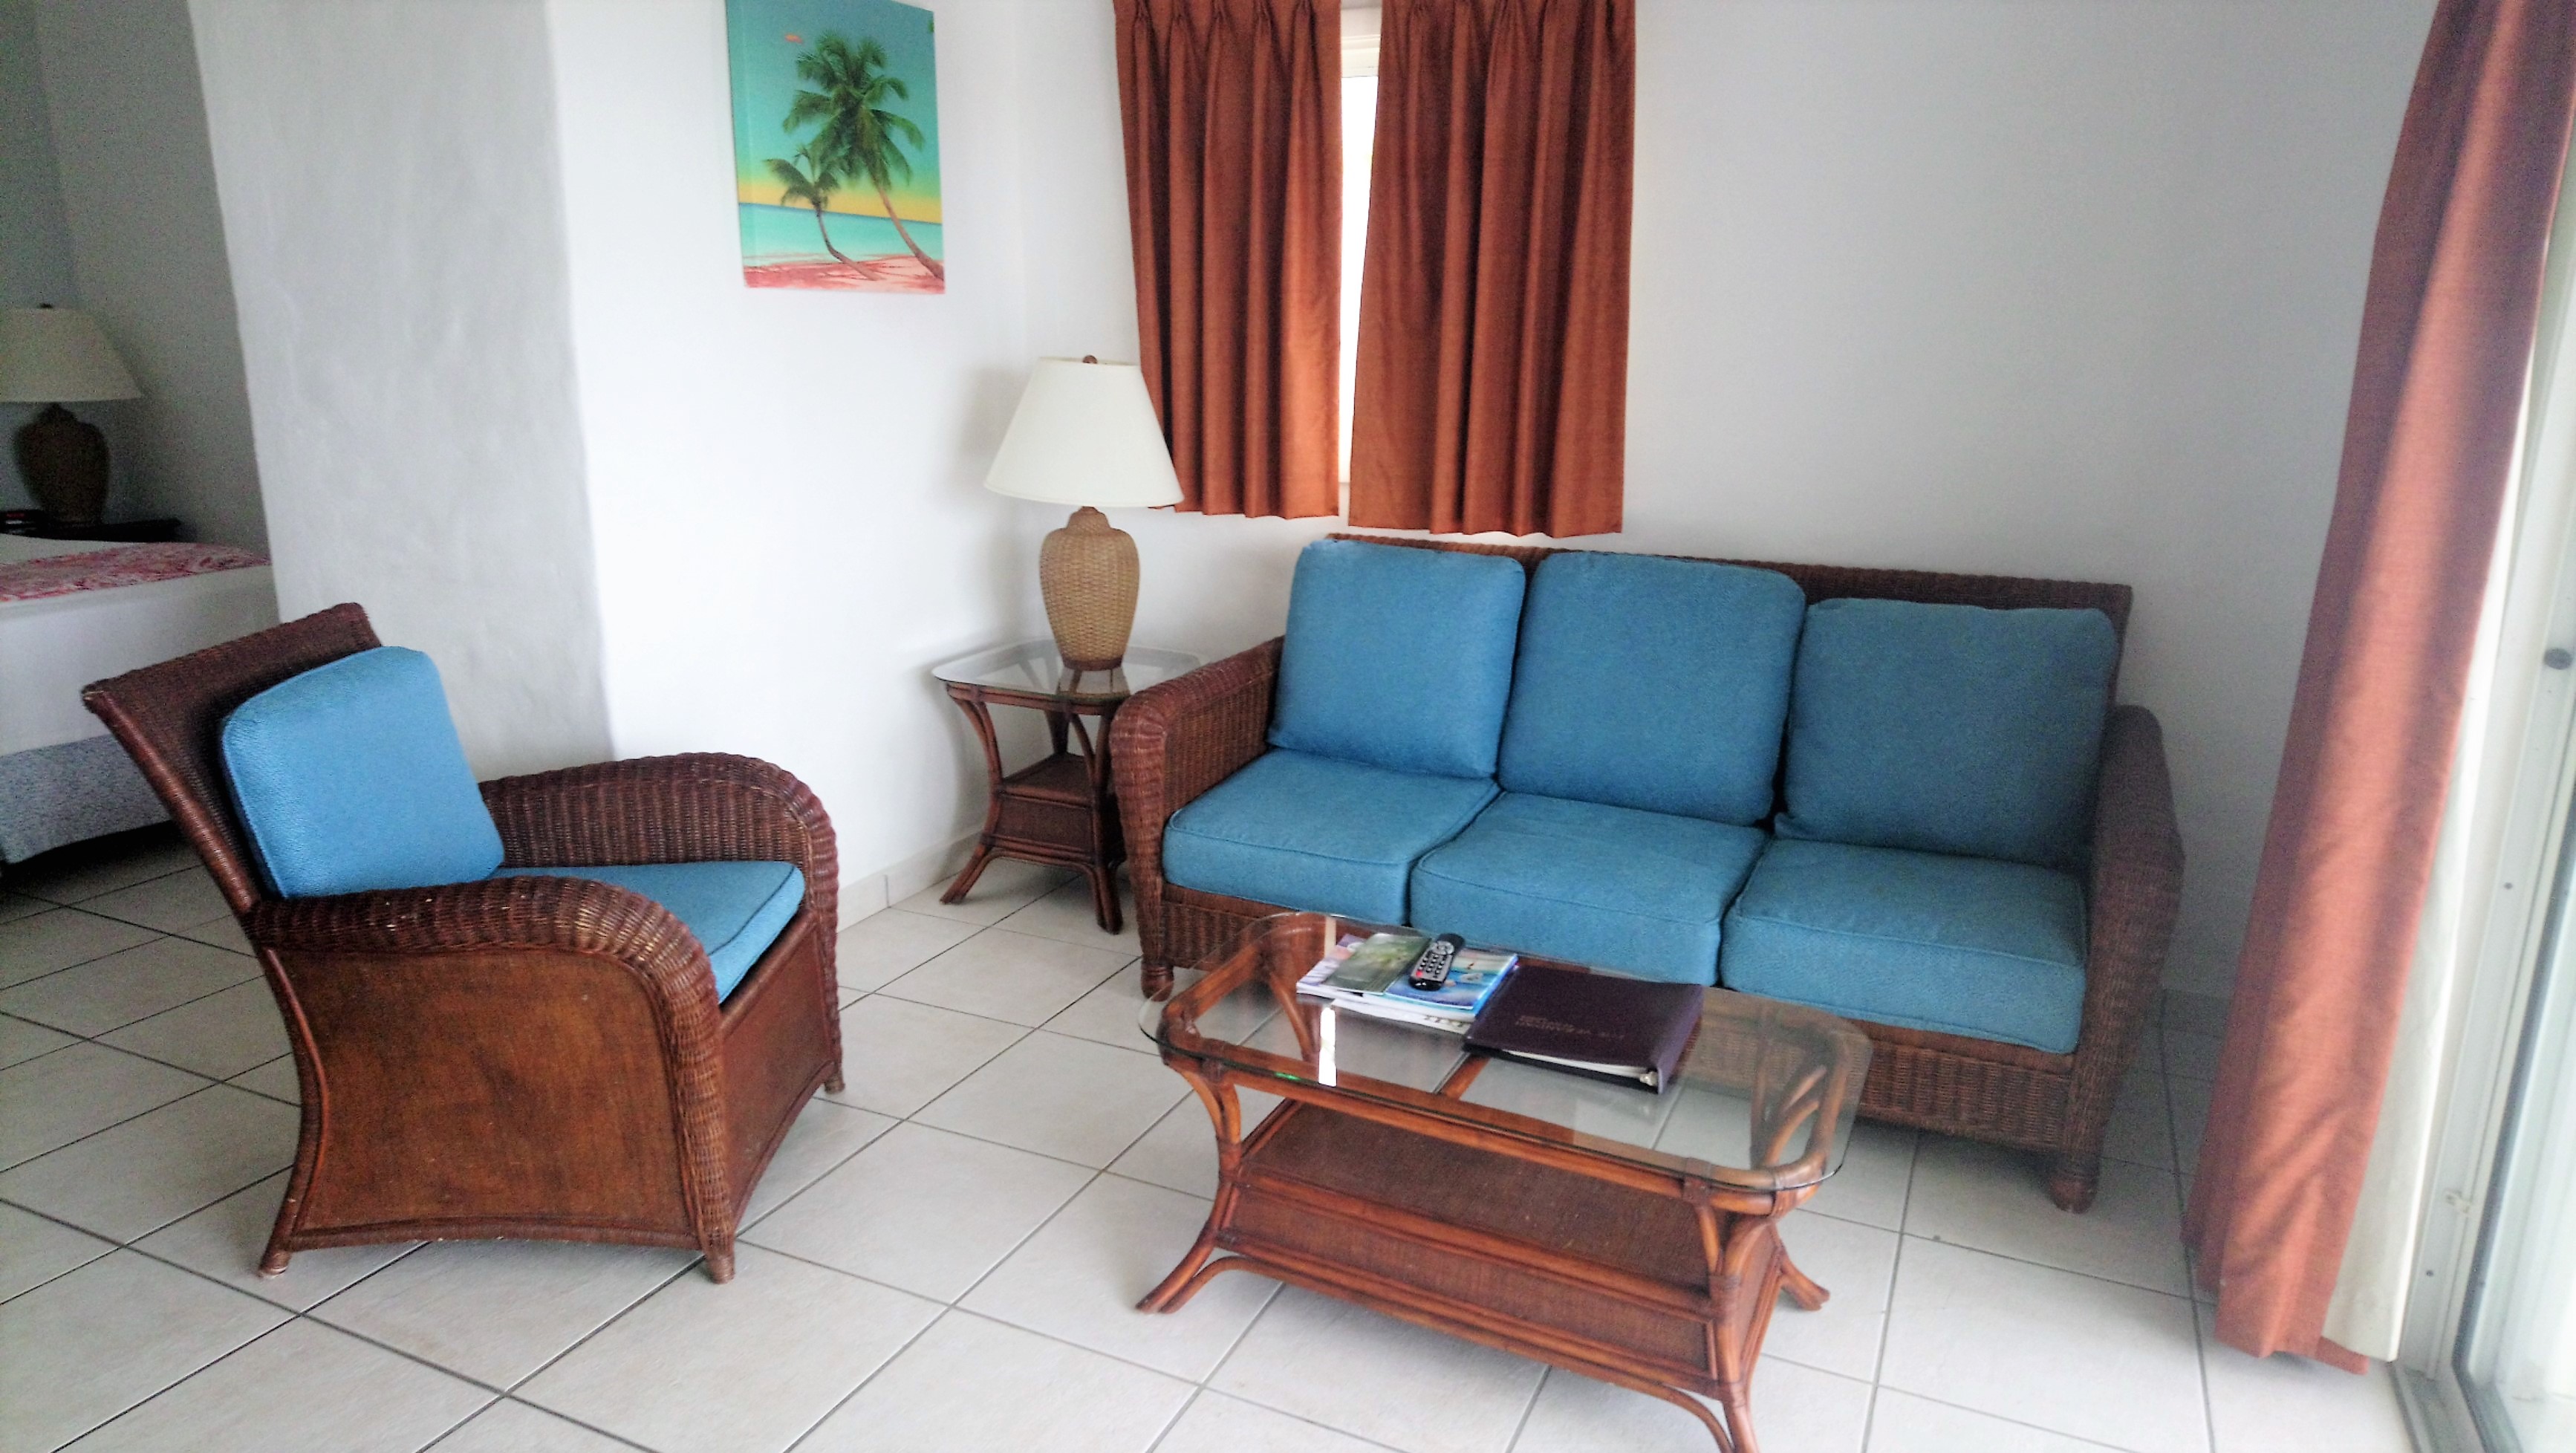 View of the living area in a Wwaterview Suite at The Verandah Resort Antigua